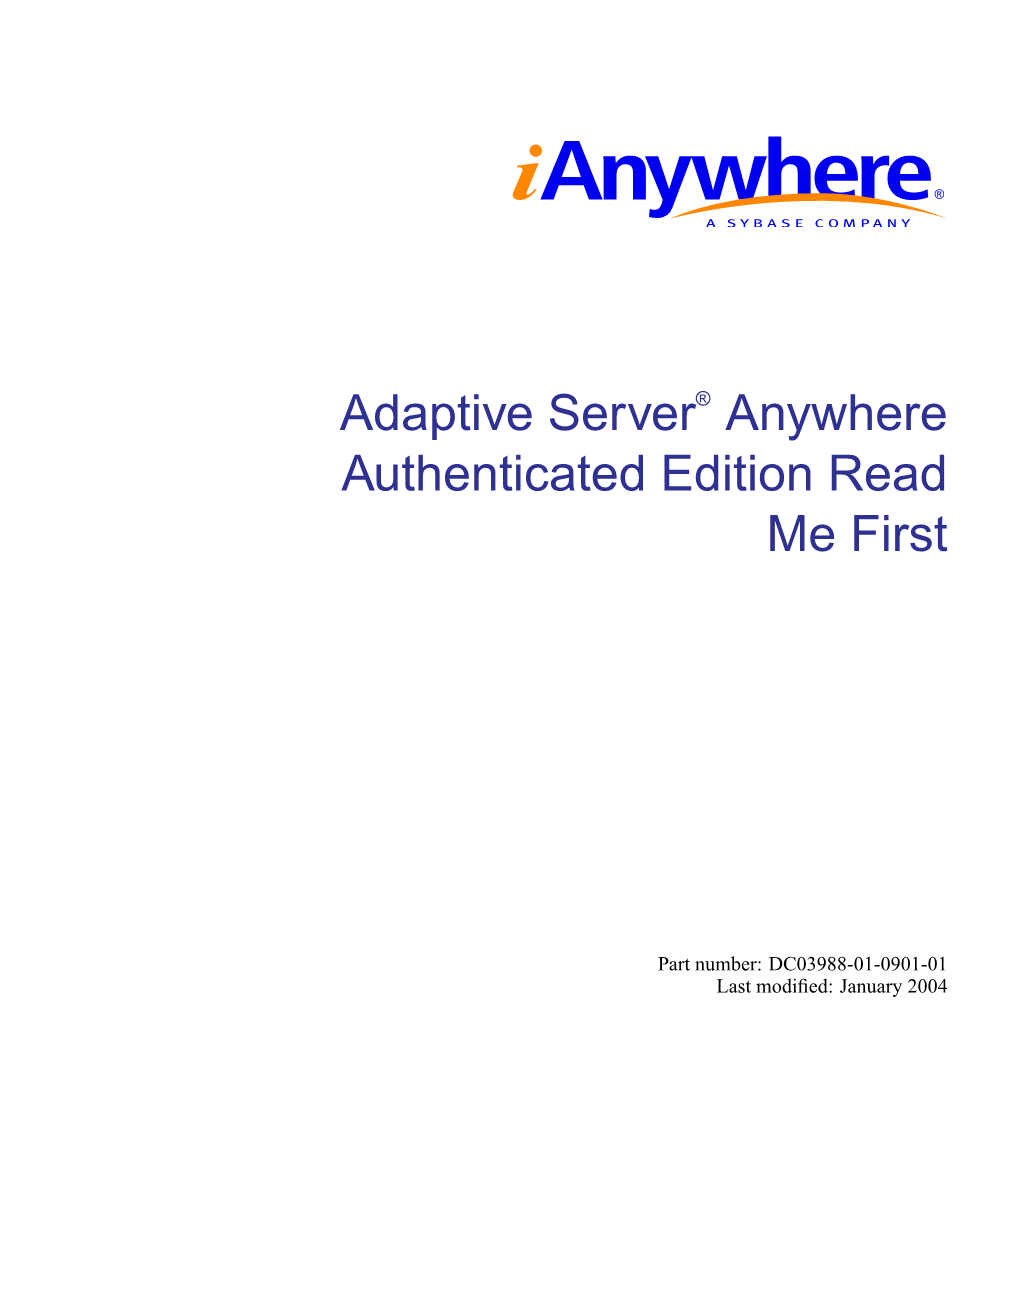 Adaptive Server® Anywhere Authenticated Edition Read Me First